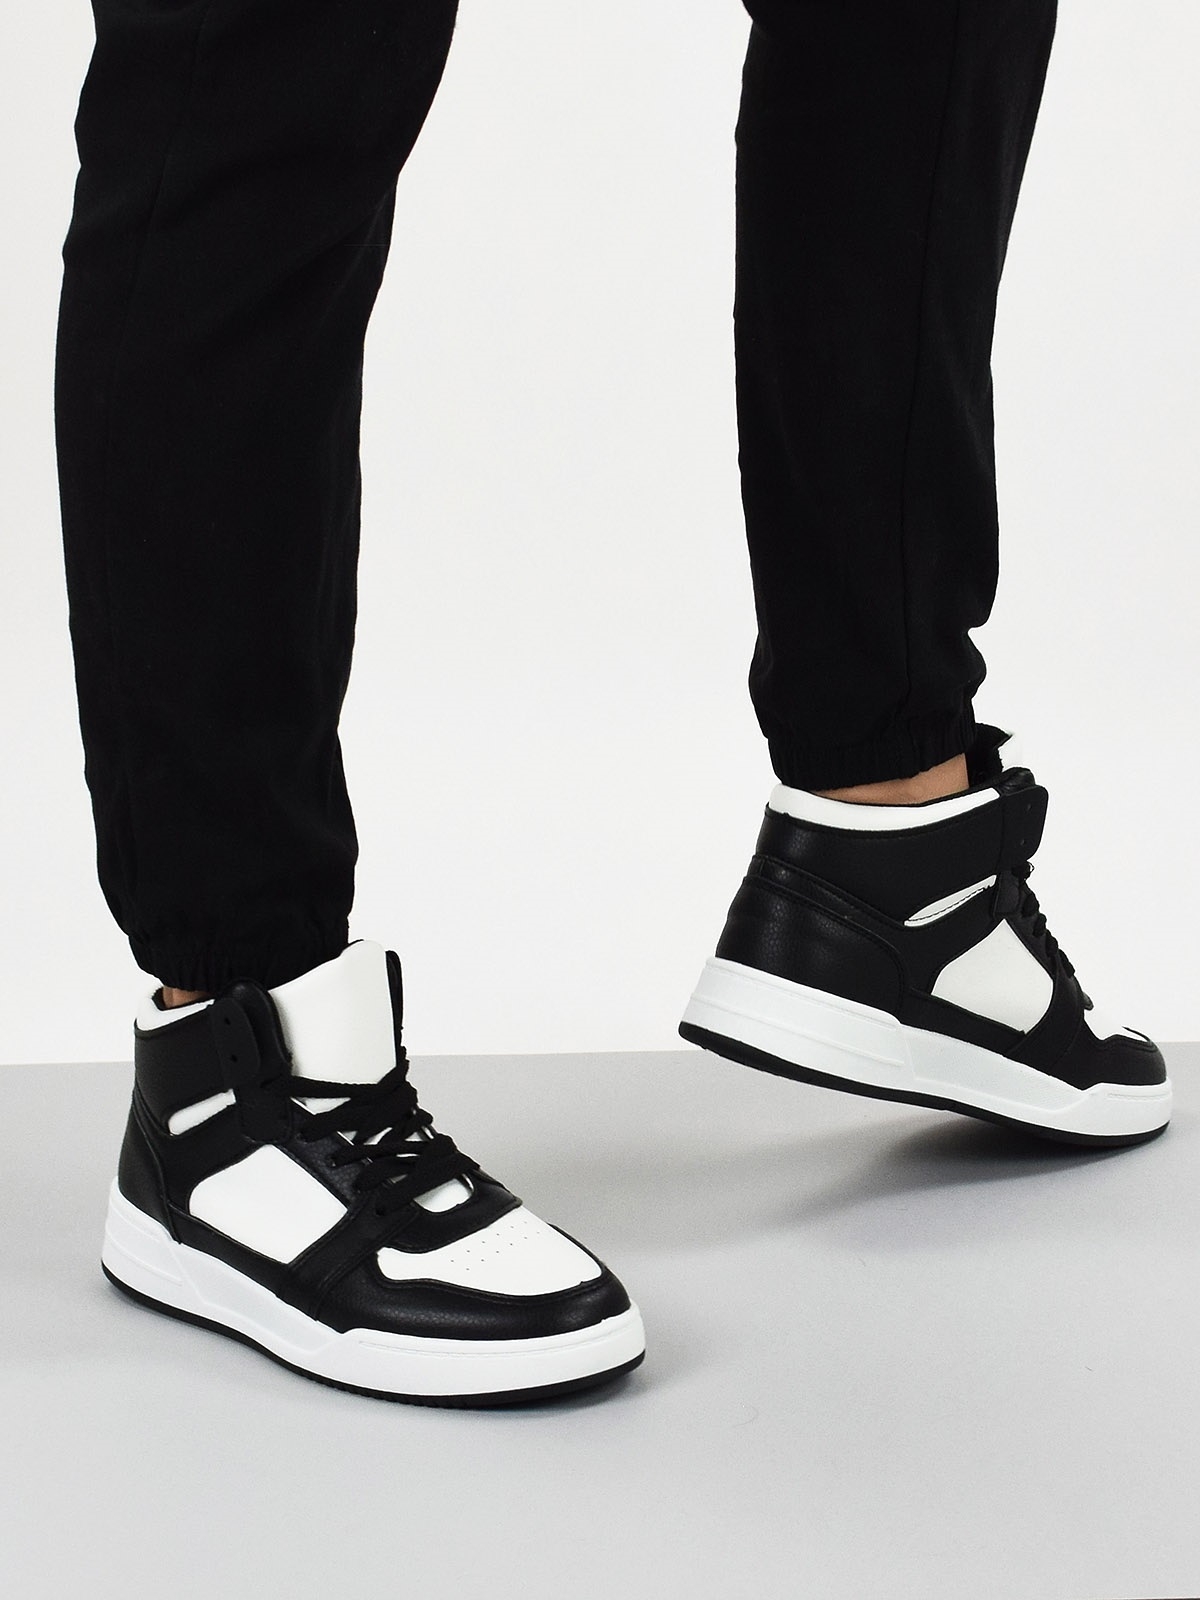 Lace up trainers in black & white